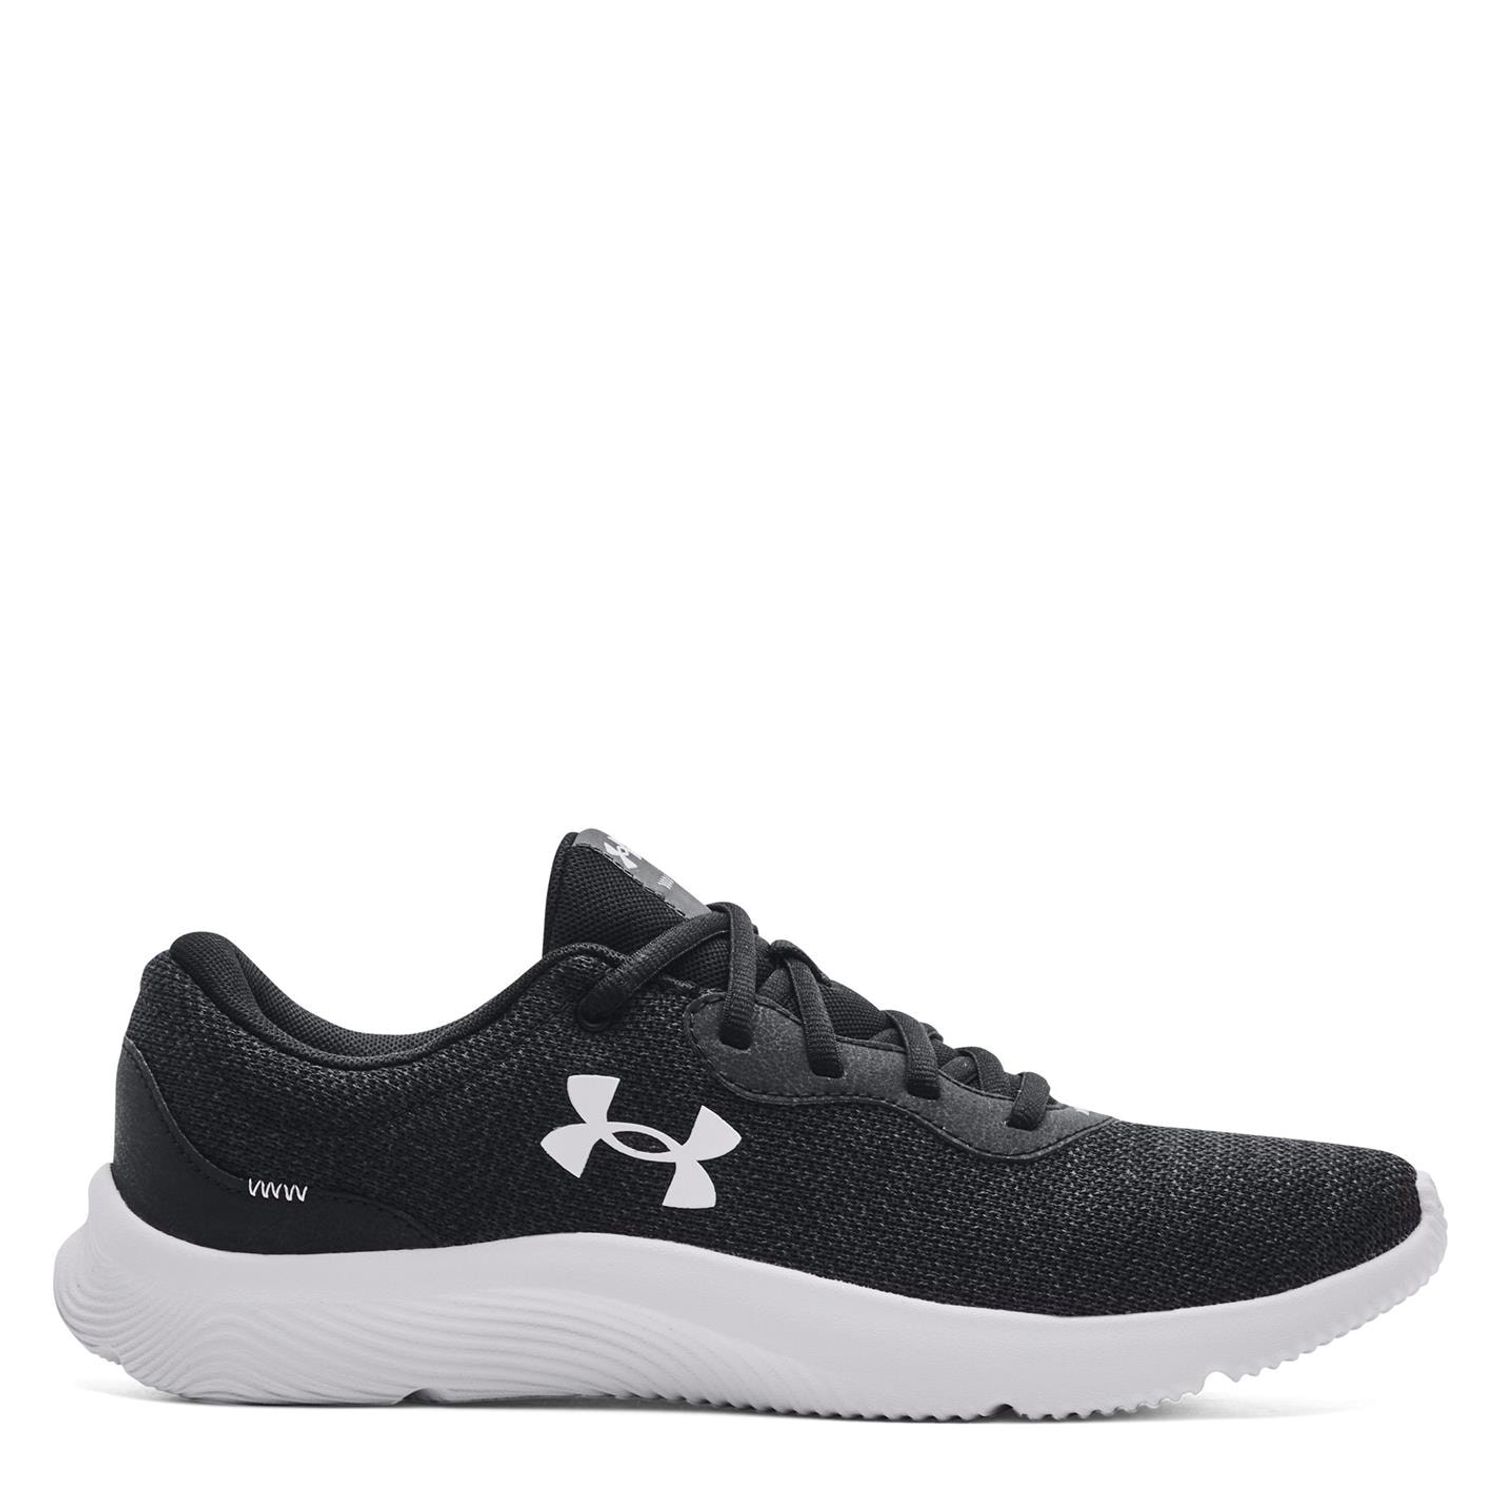 Black Under Armour Mens Armour Mojo 2 Runners - Get The Label